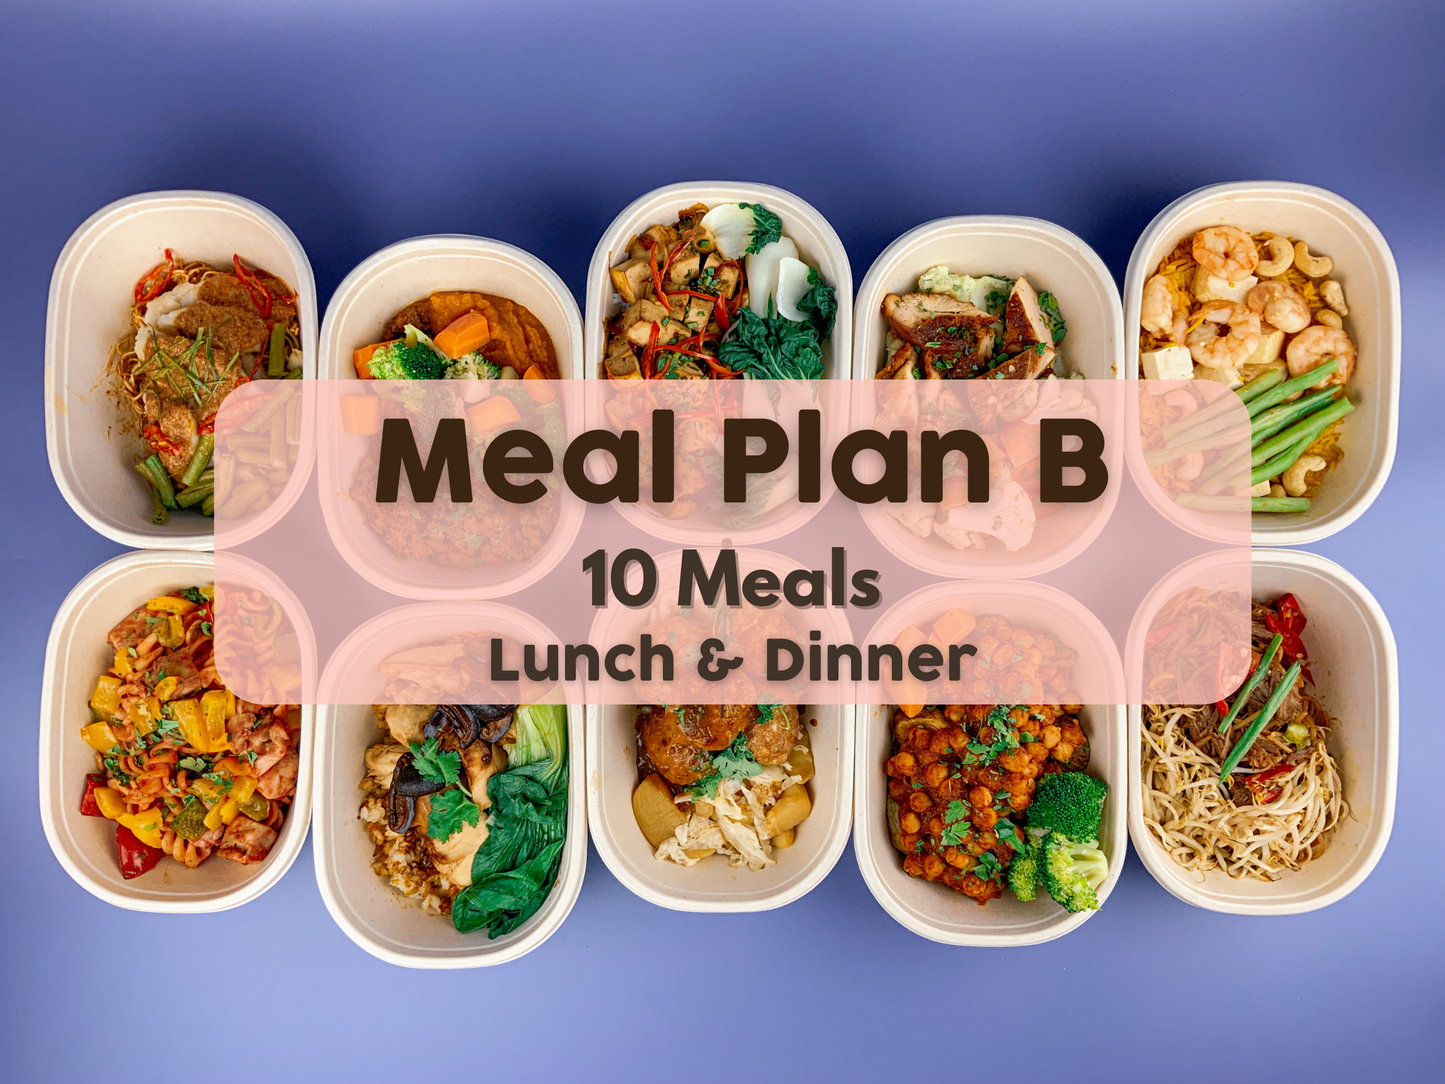 23rd - 27th October Meal Plan B